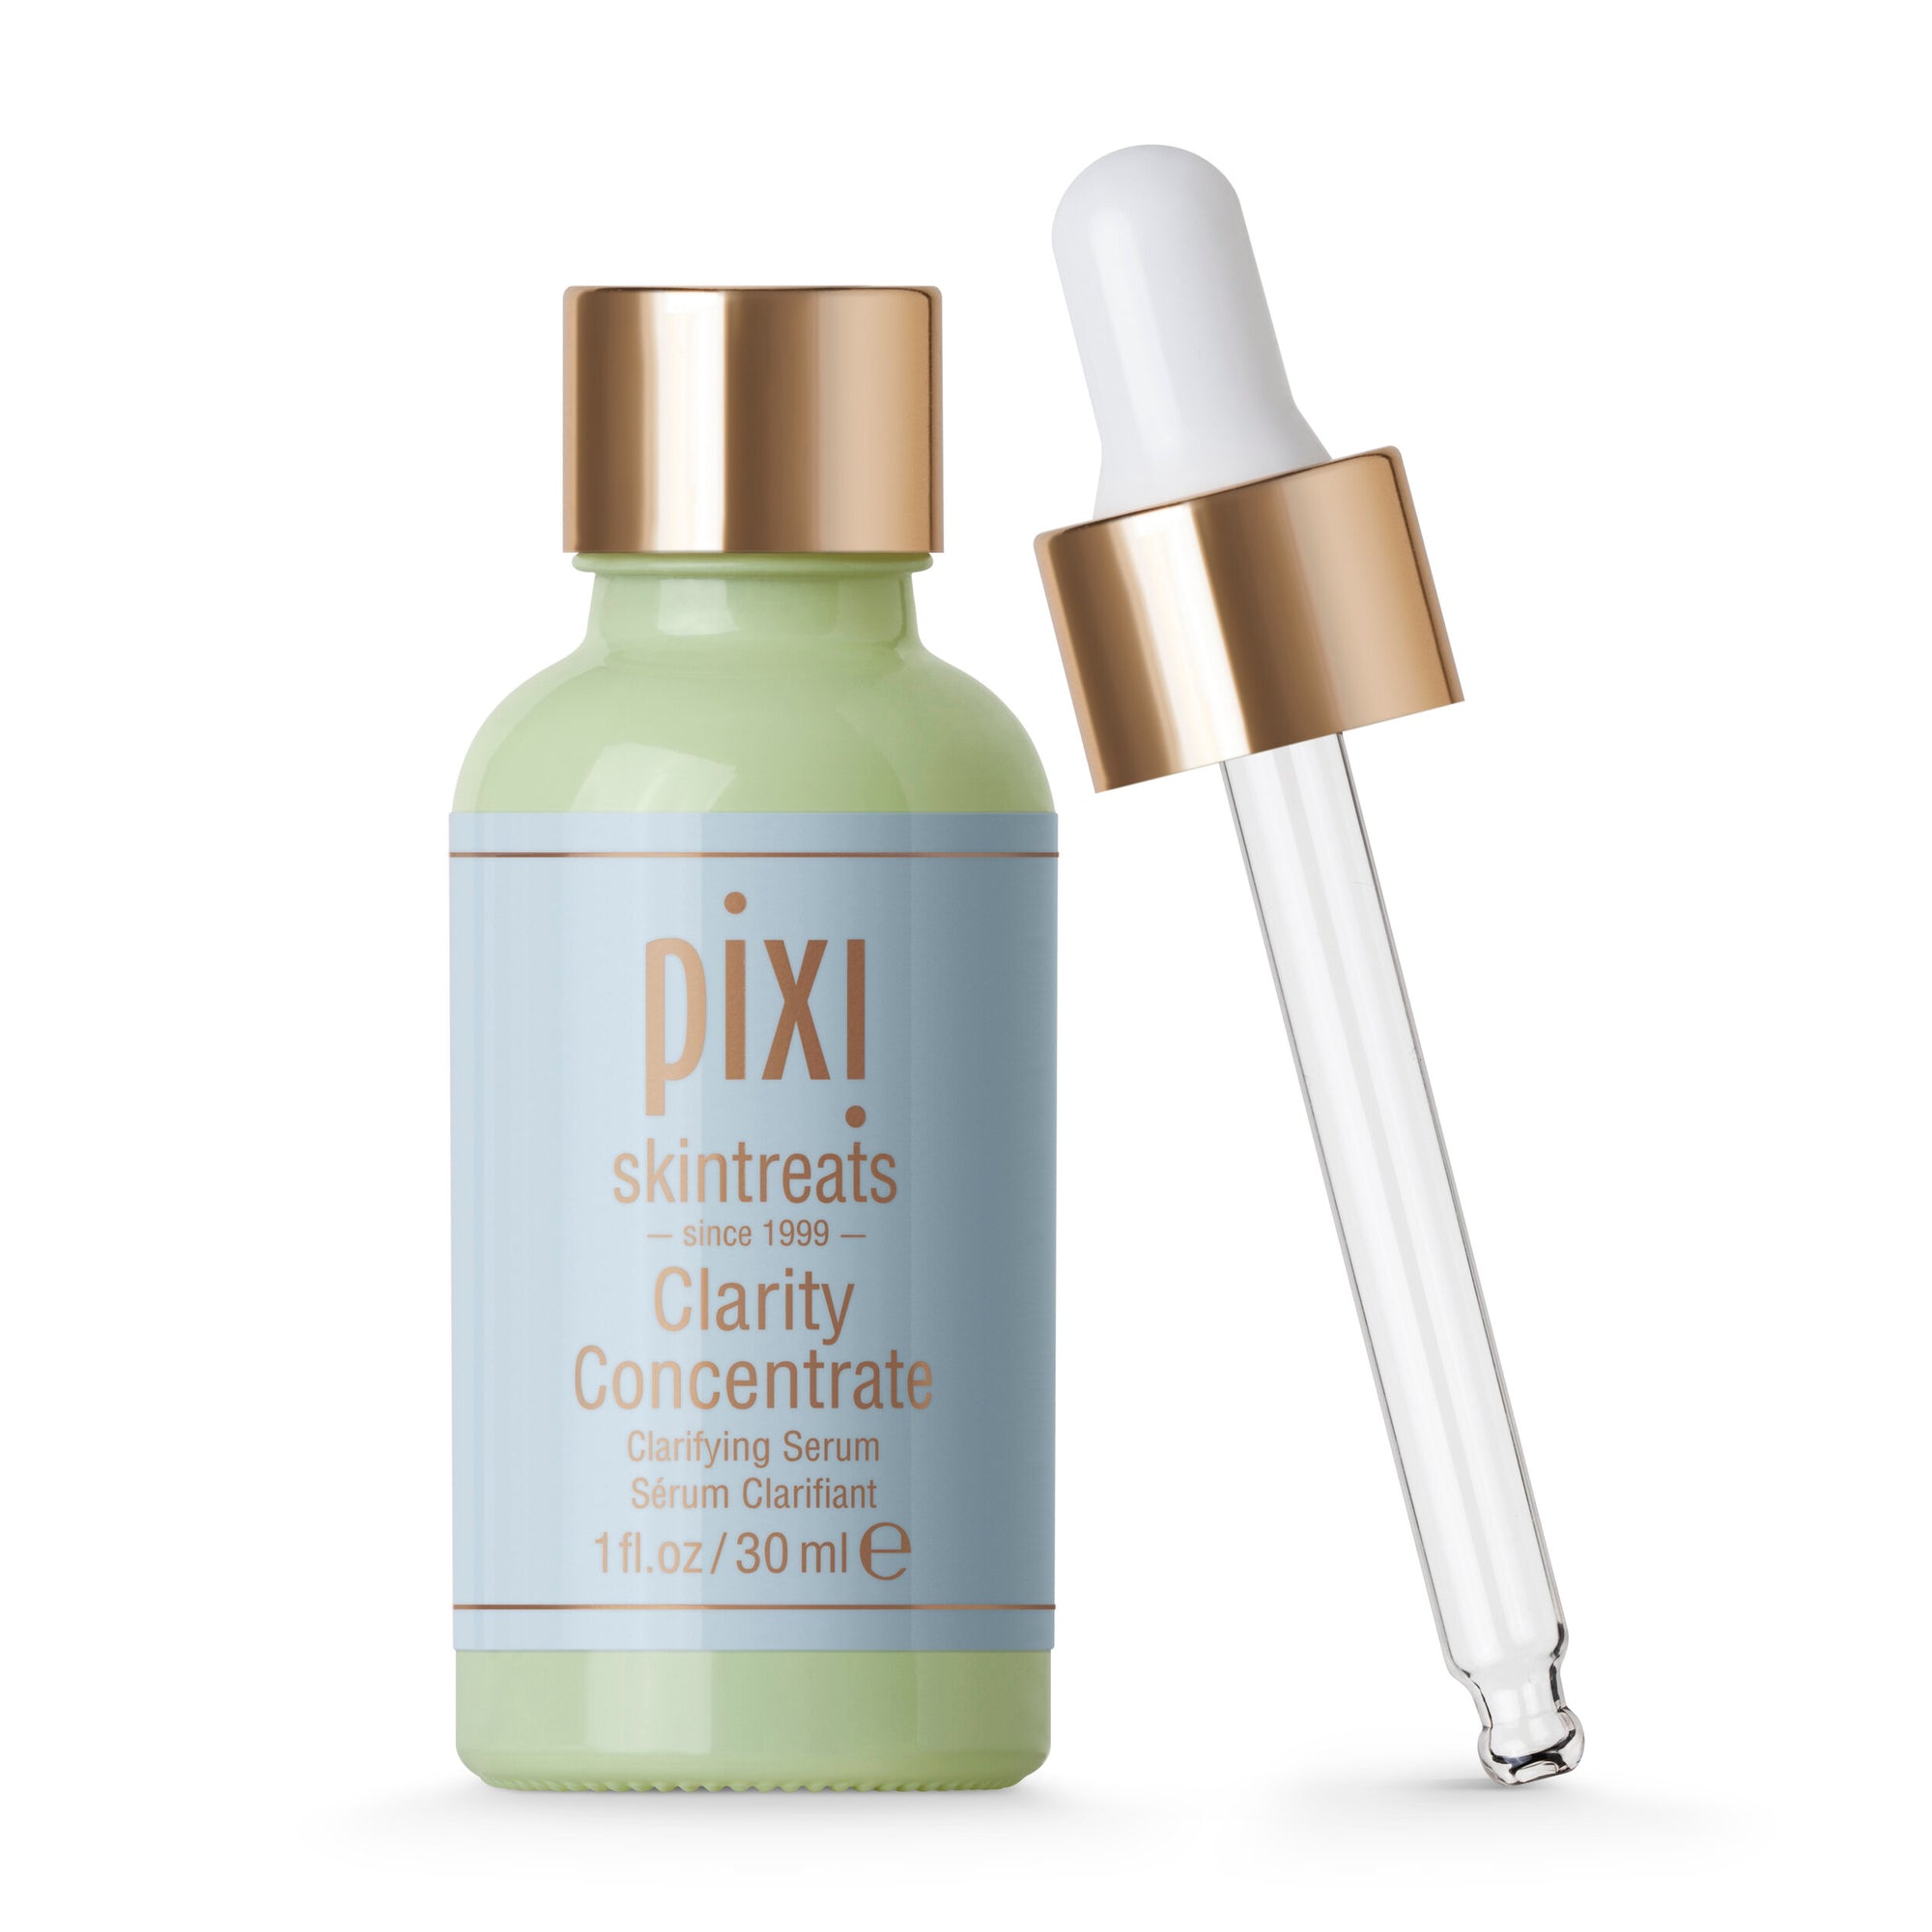 PIXI Clarity Concentrate